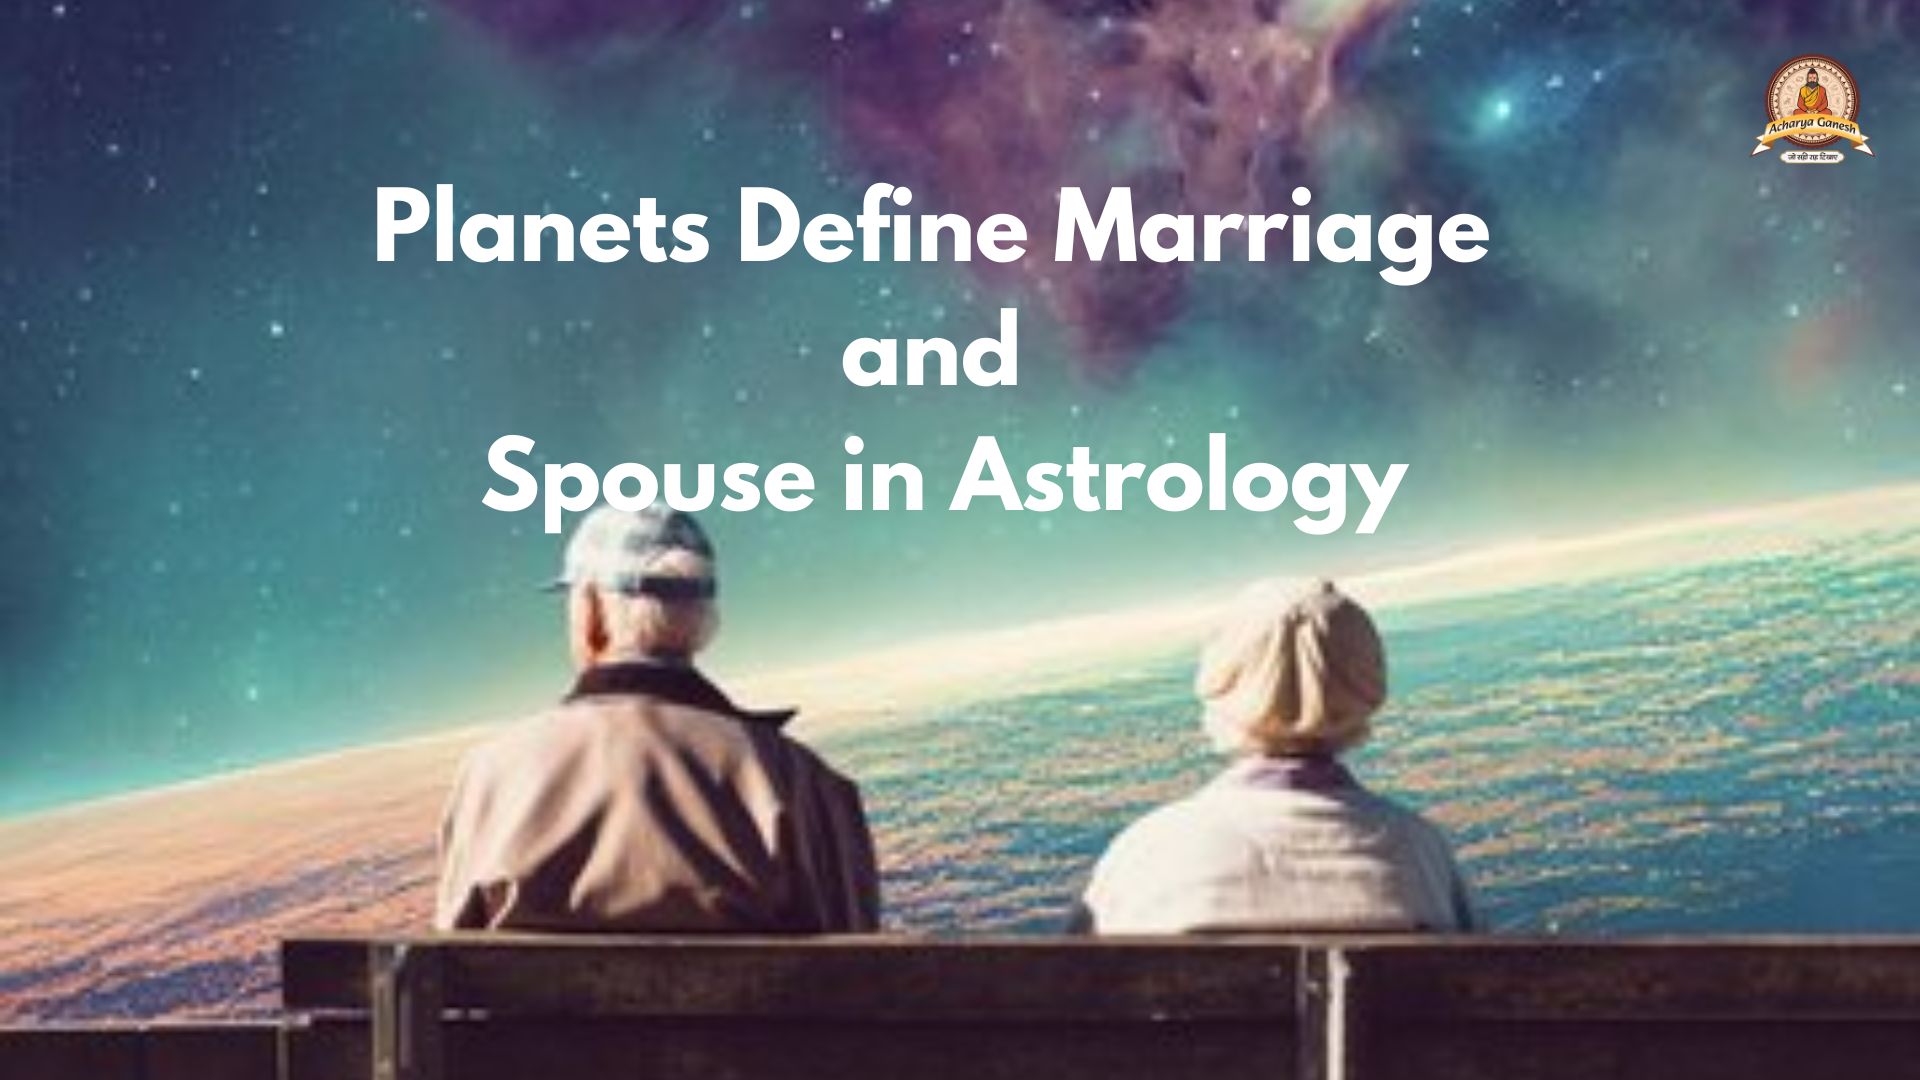 Planets Define Marriage and Spouse in Astrology - Uttar Pradesh - Noida ID1520200